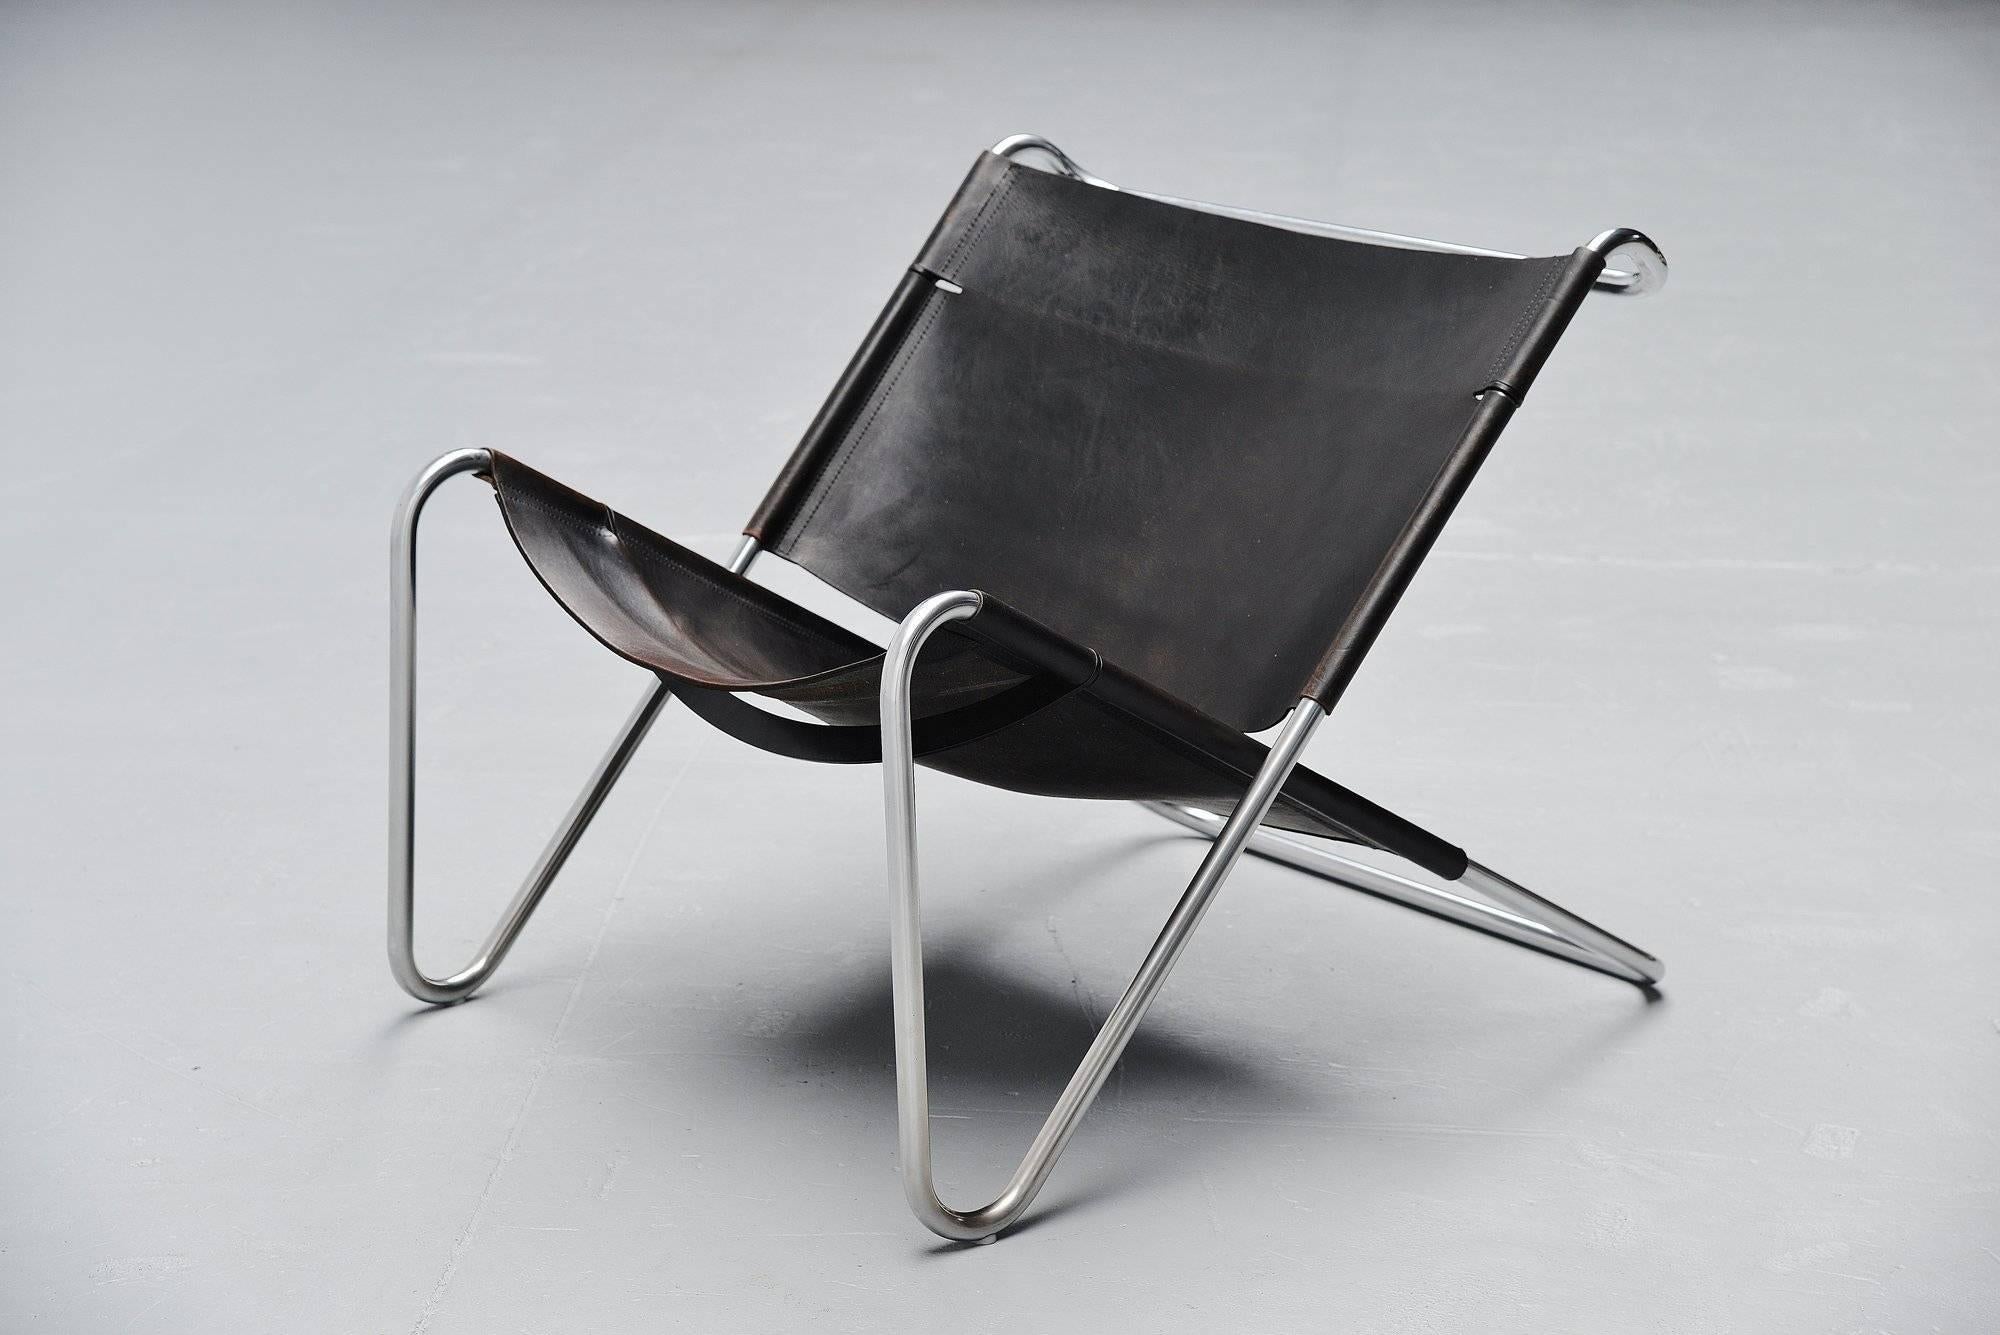 Stainless Steel Kwok Hoi Chan Lounge Chairs SZ15 ‘T Spectrum, 1973